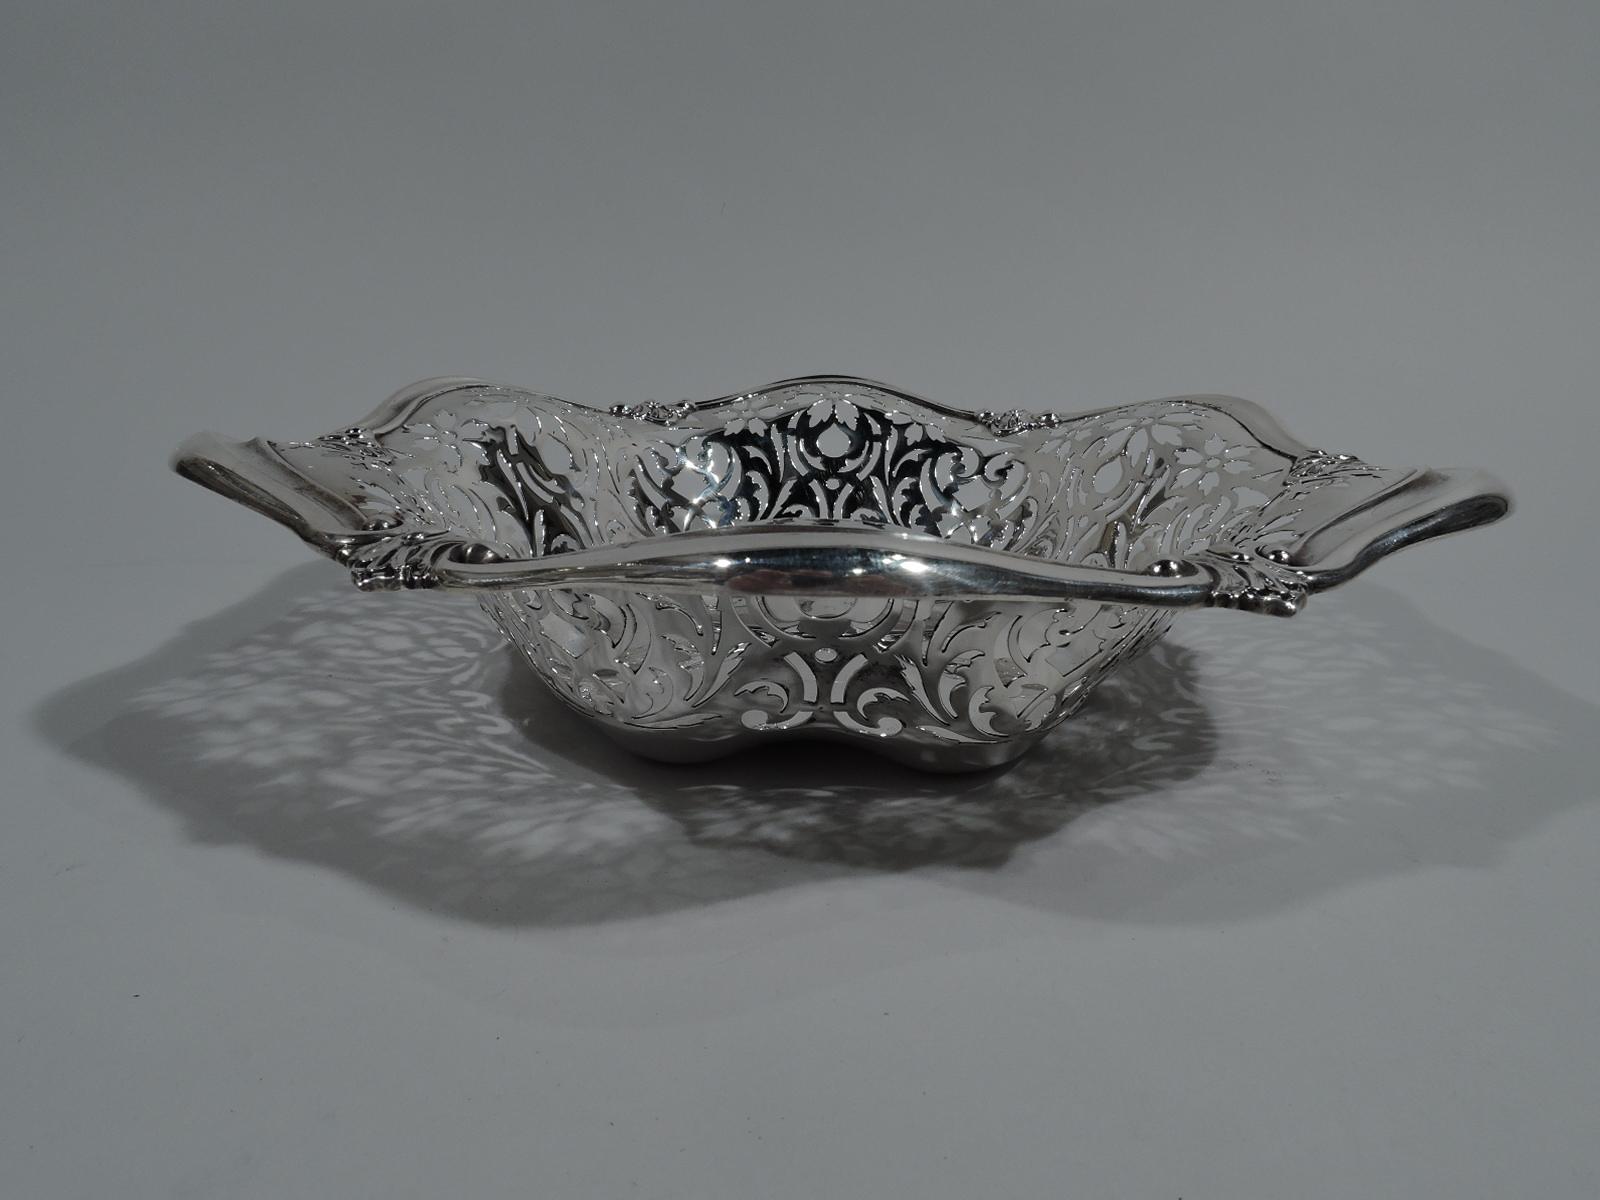 Pretty Art Nouveau sterling silver bowl. Made by Gorham in Providence in 1908. Solid and lobed well. Sides pierced with flowers and scrolls. Wavy and scrolled rim with applied leaves. Fully marked including date symbol and no. A7362. Weight: 8.5